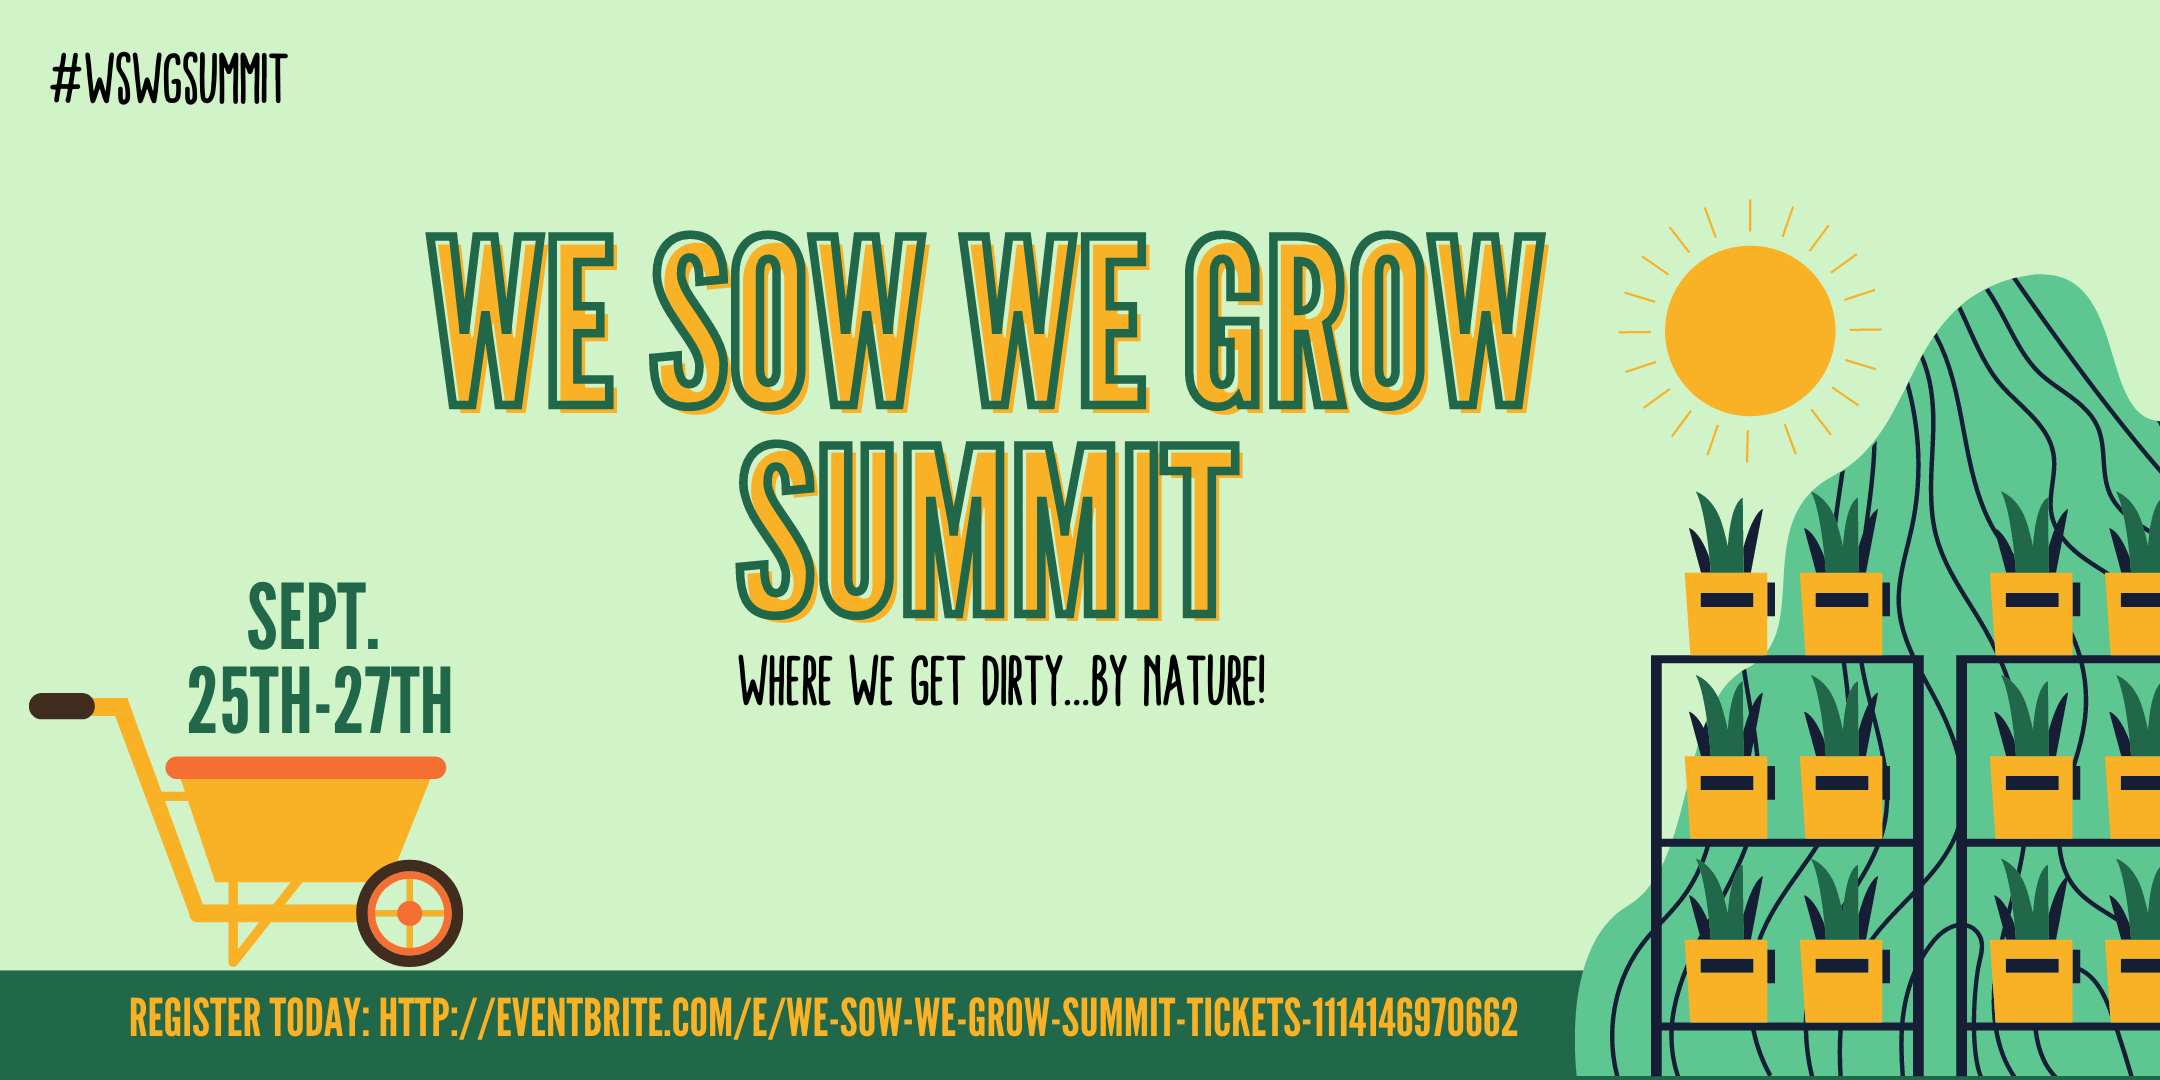 Announcing Speakers for We Sow We Grow Summit